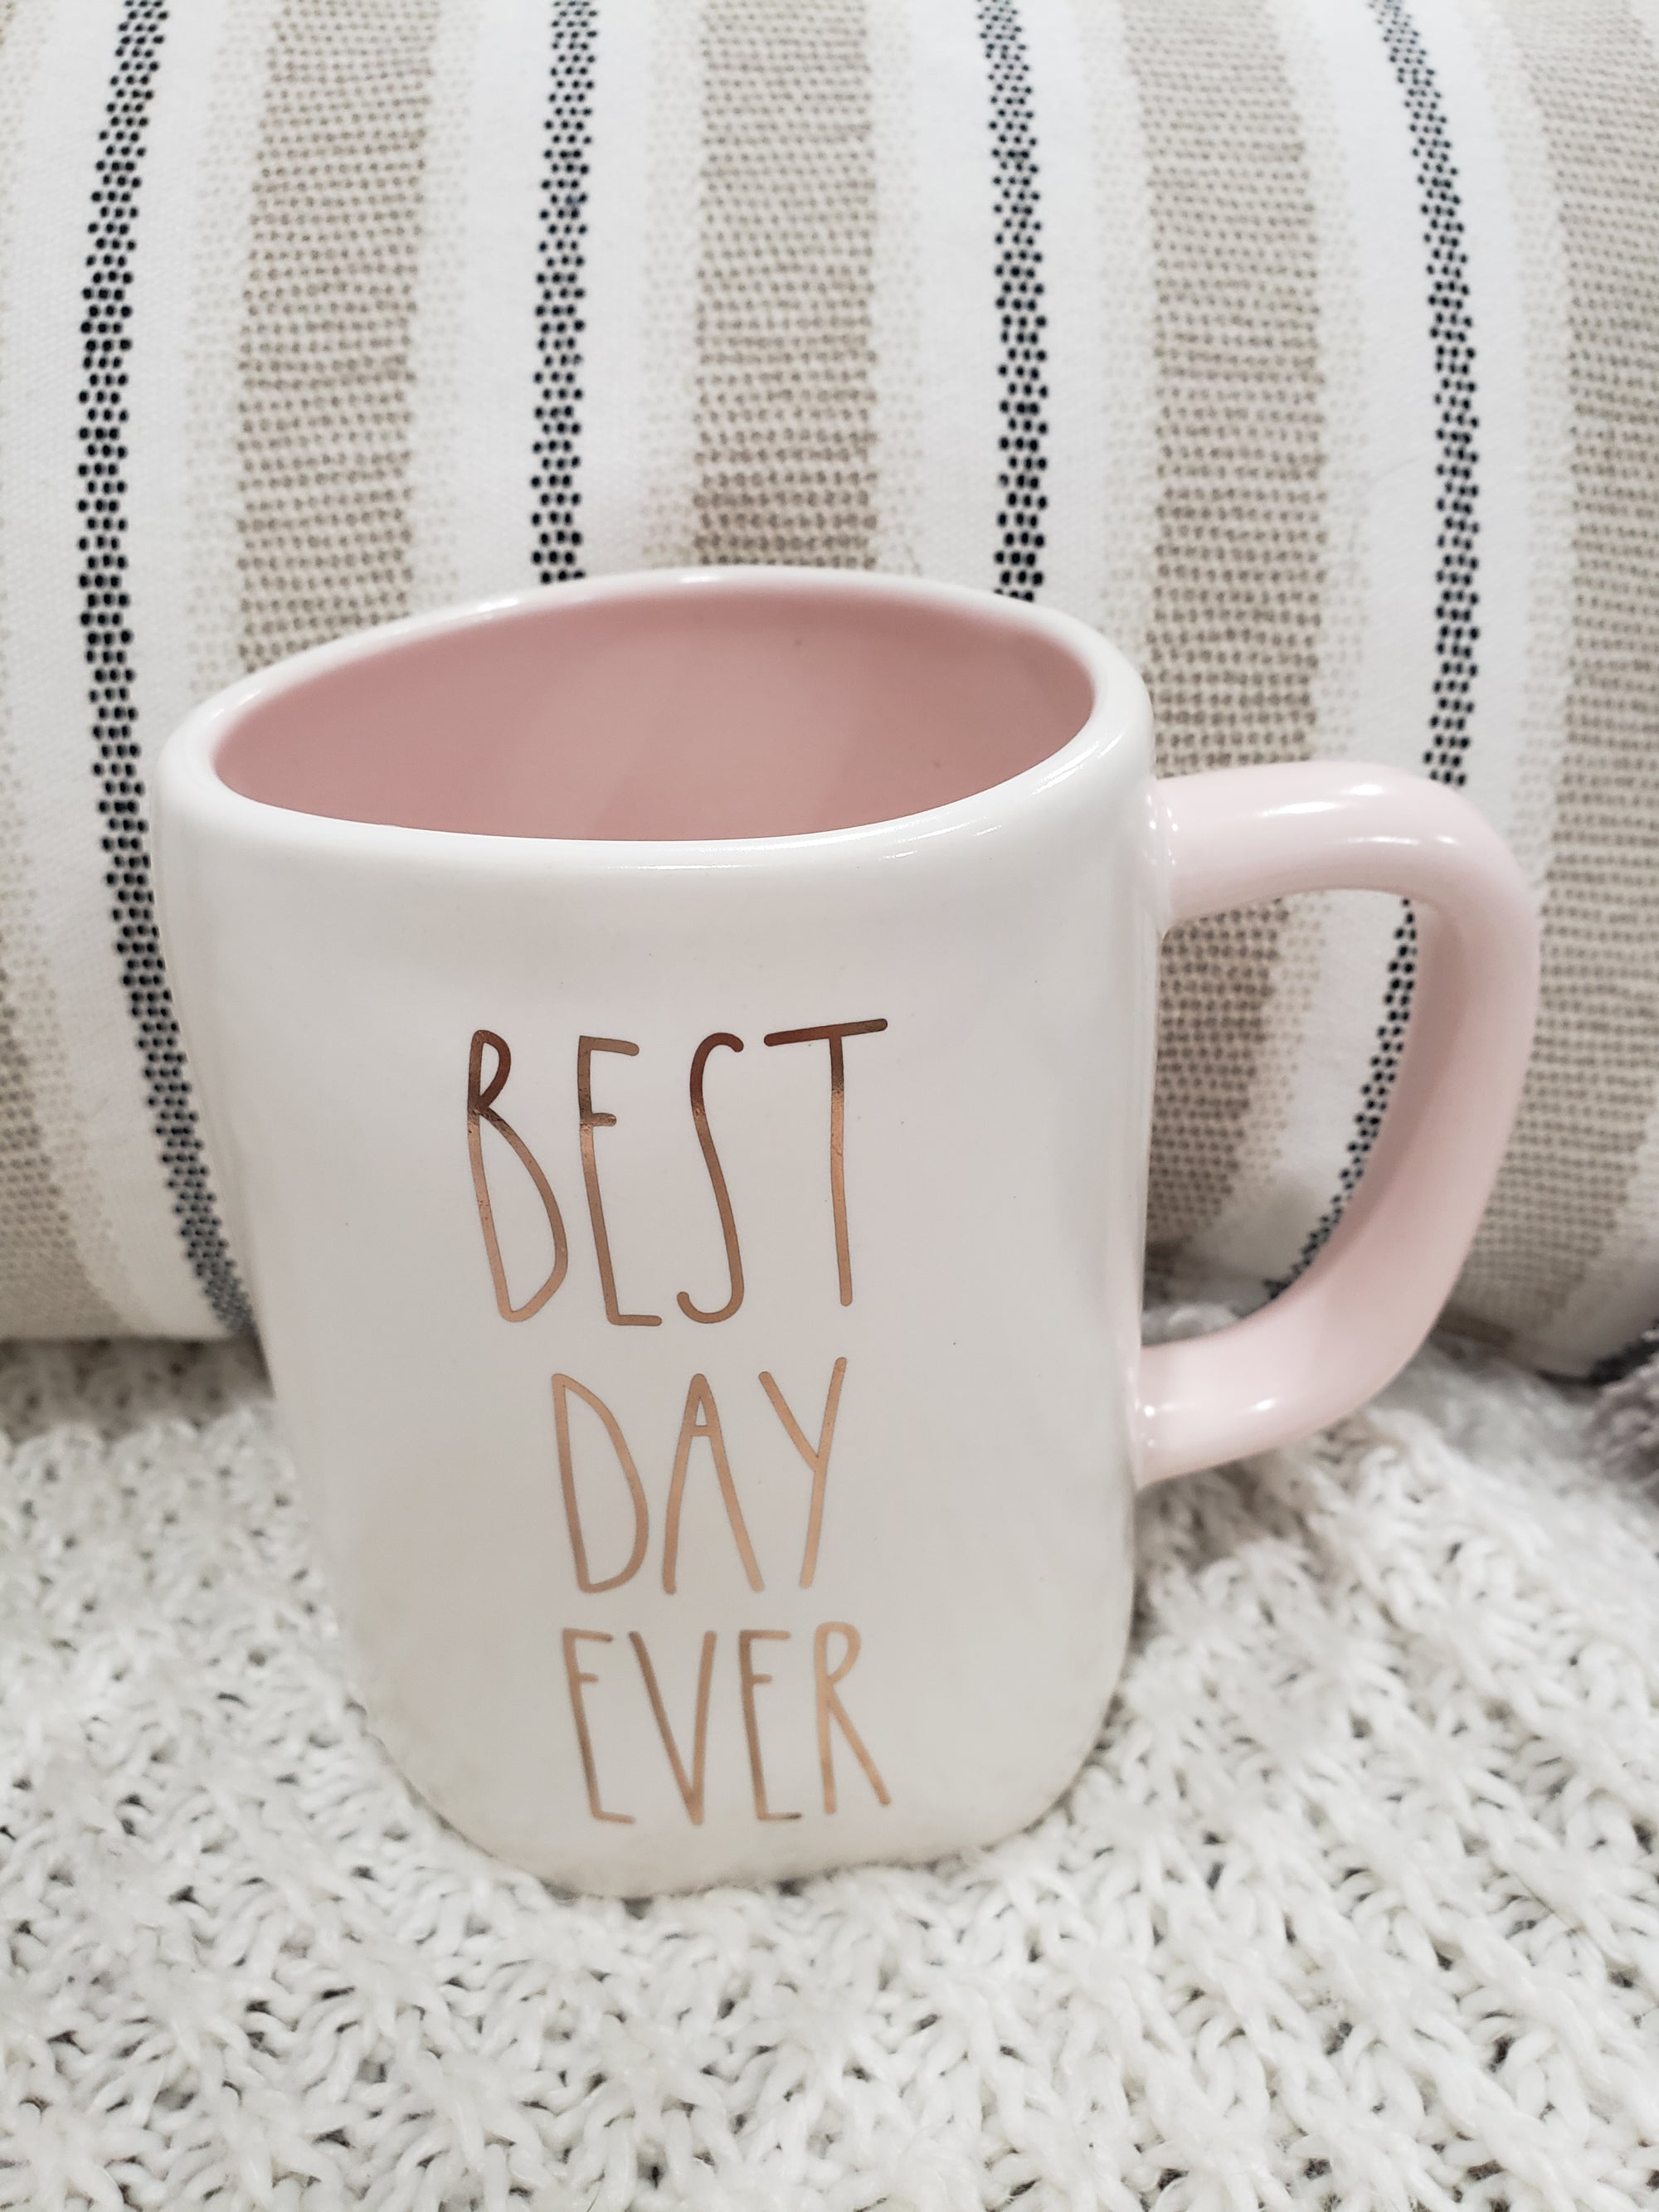 Rae Dunn "The Best Day Ever" Mug Collection